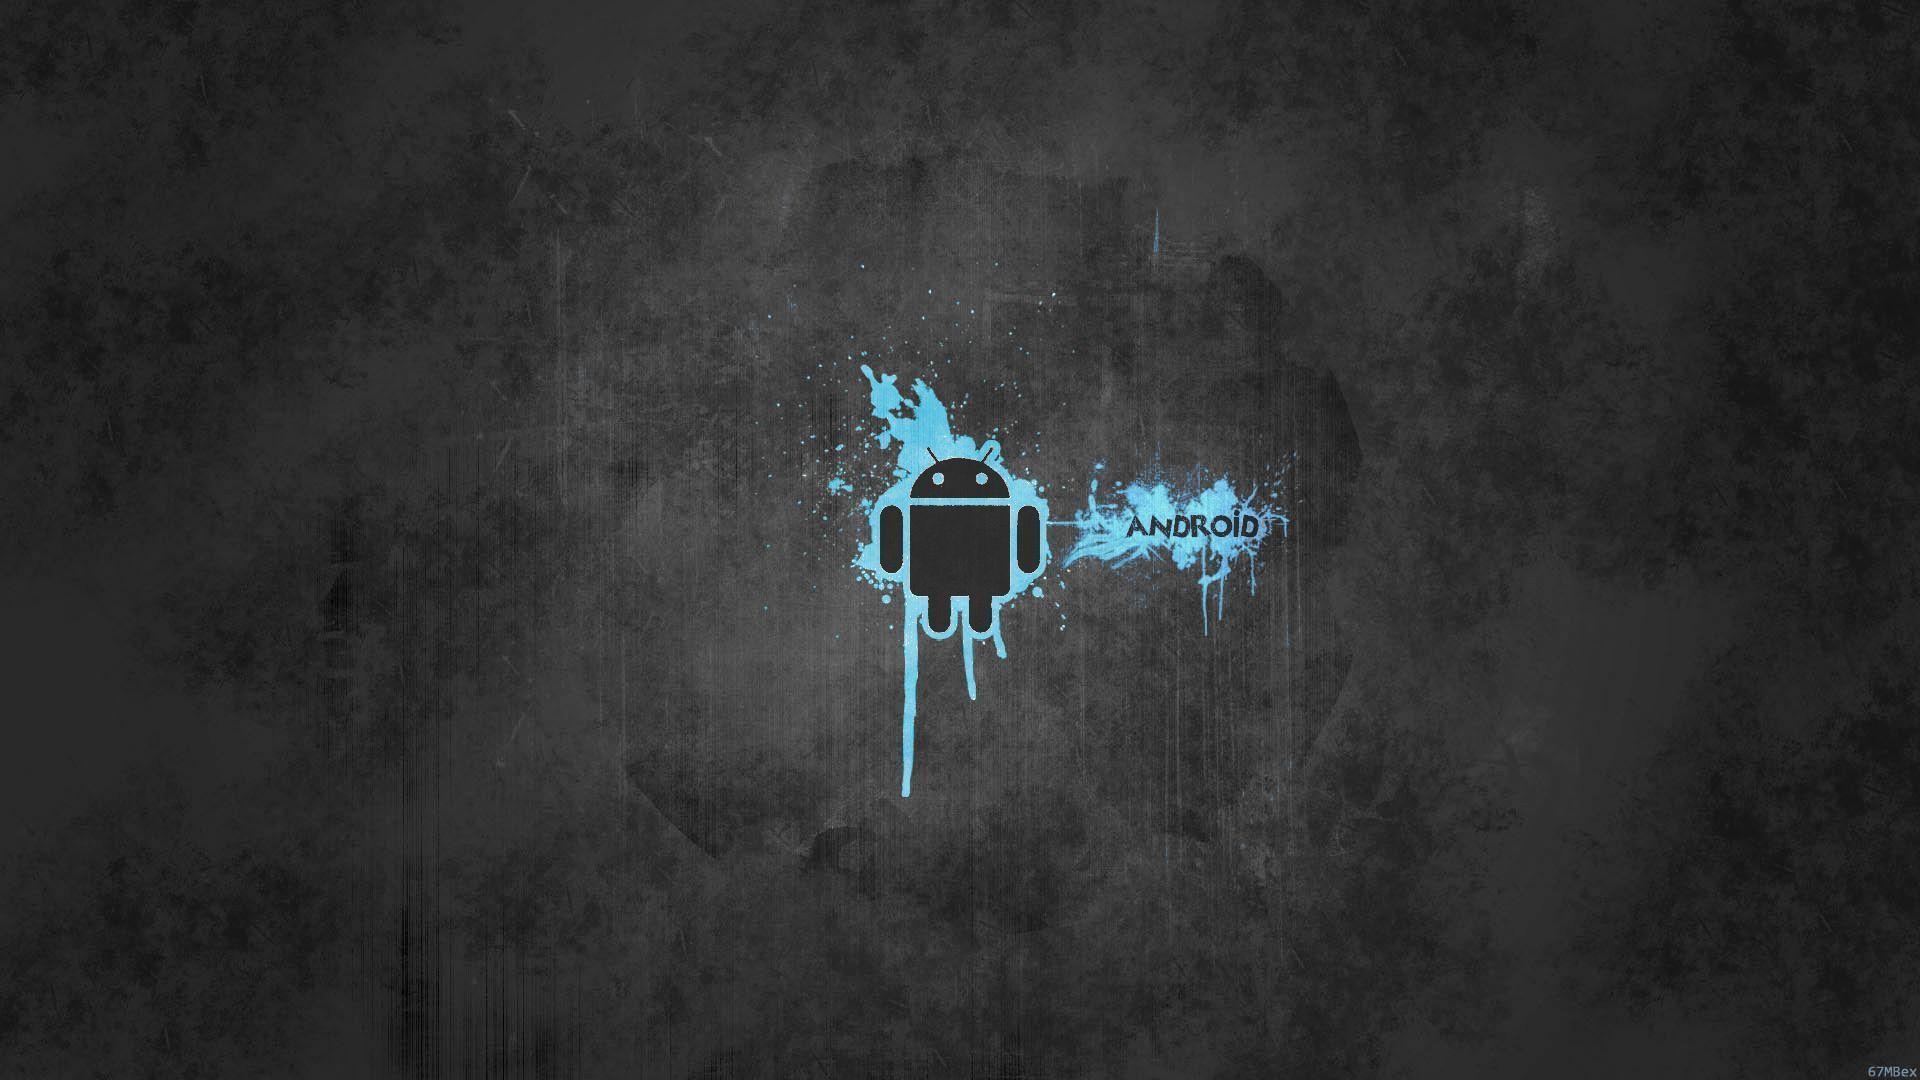 New Android WallPapers HD Free Download